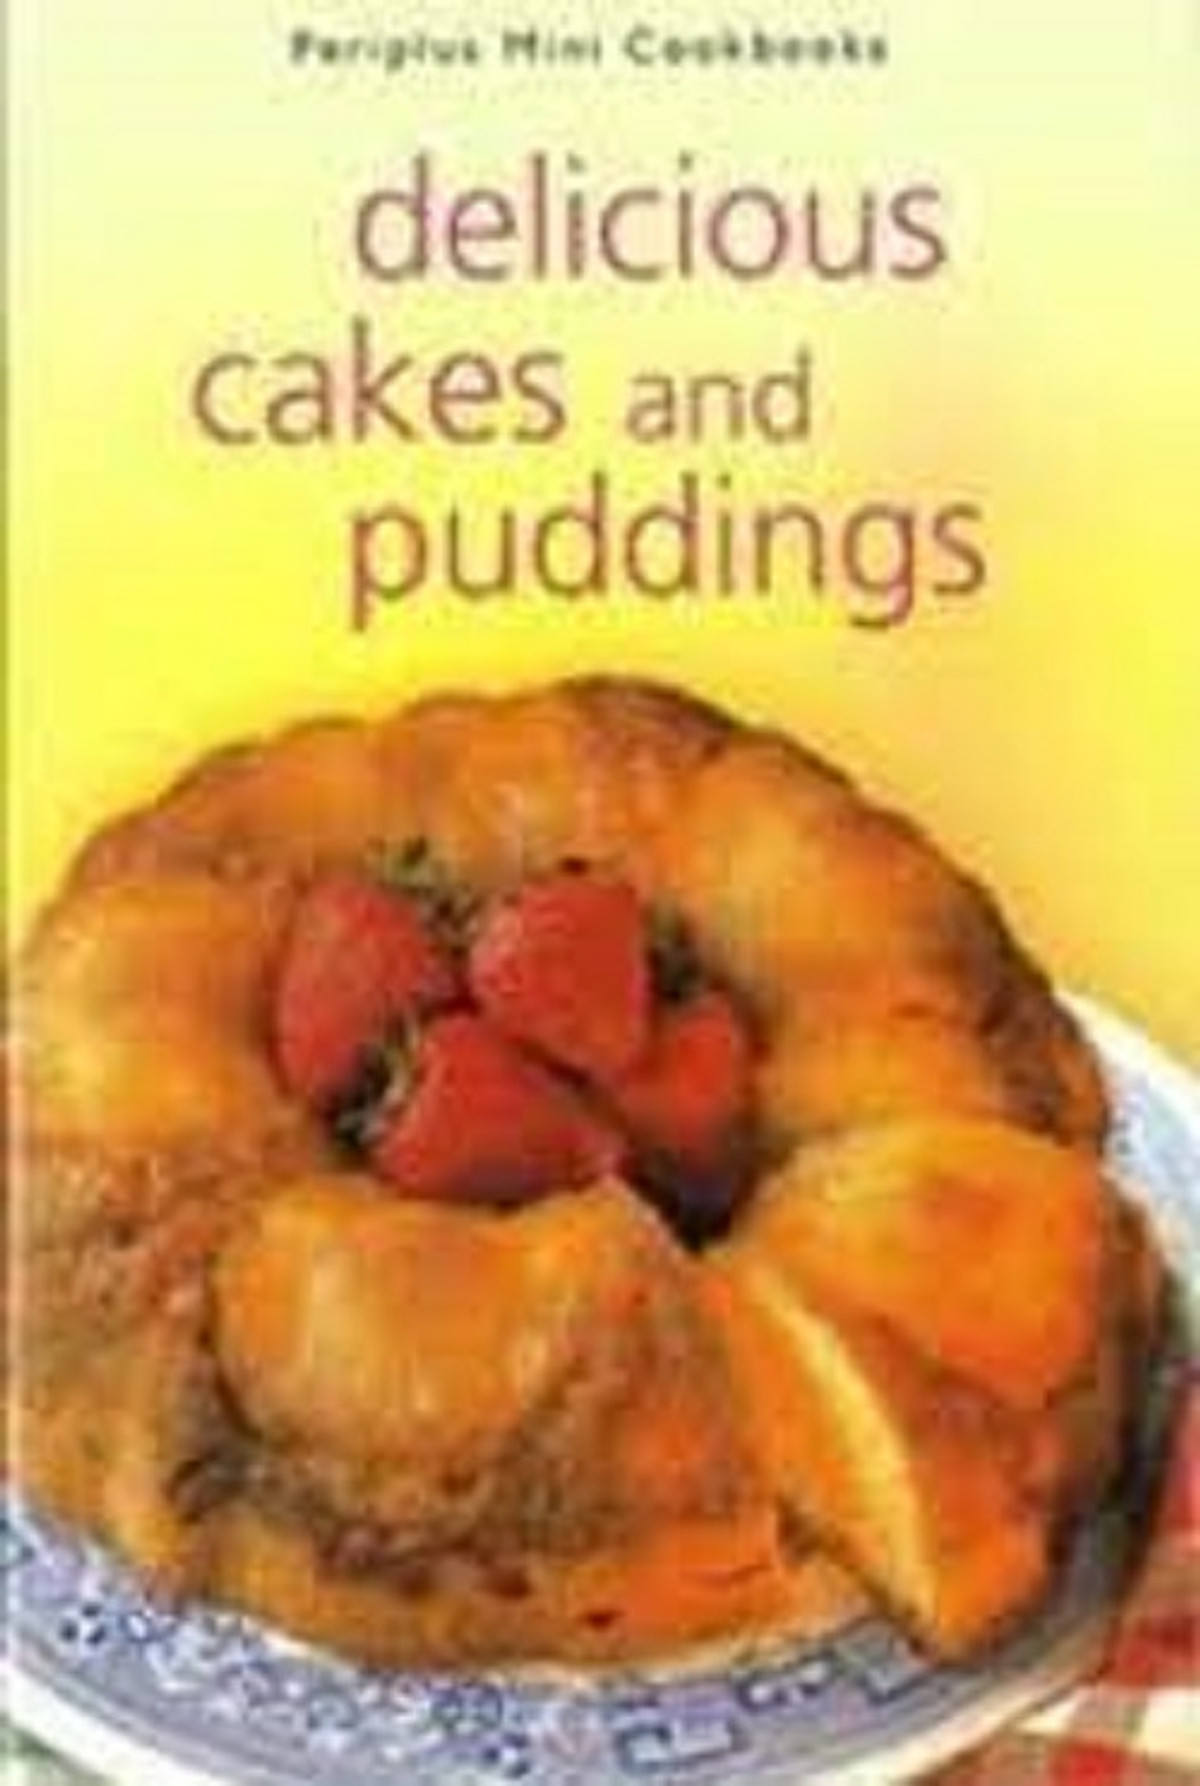 DELICIOUS CAKES AND PUDDINGS